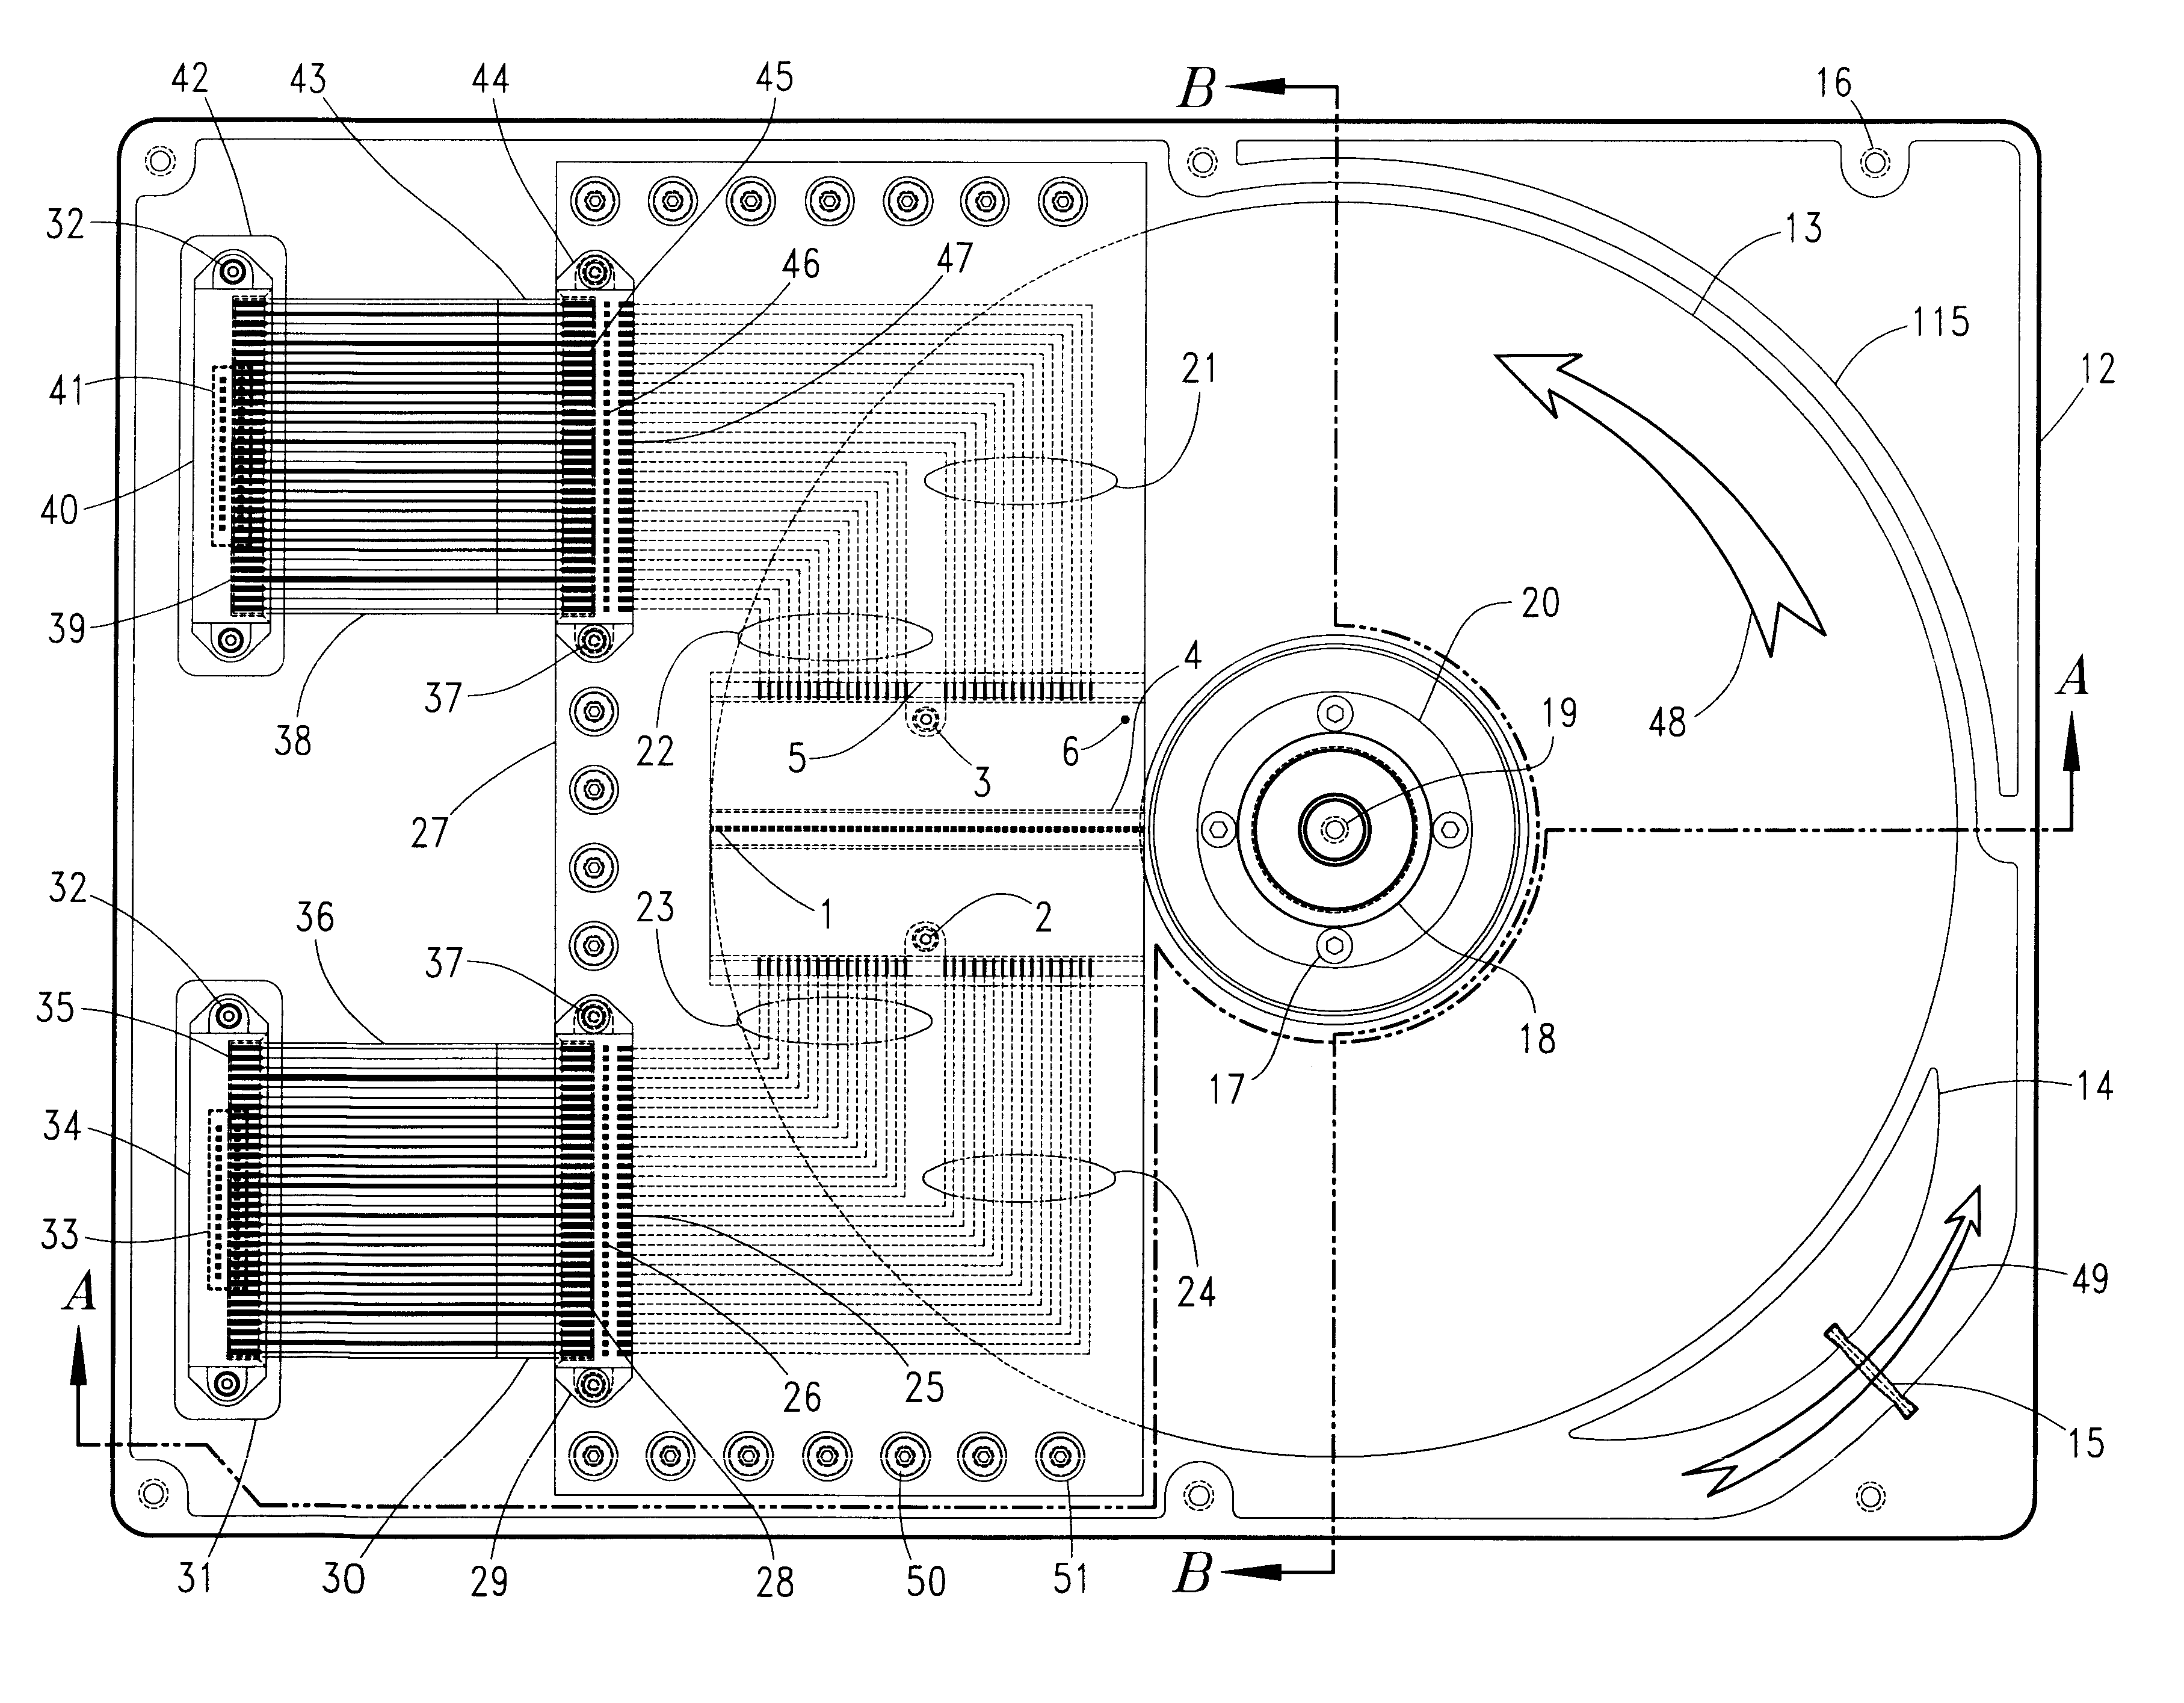 Magnetic data storage fixed hard disk drive using stationary microhead array chips in place of flying-heads and rotary voice-coil actuators